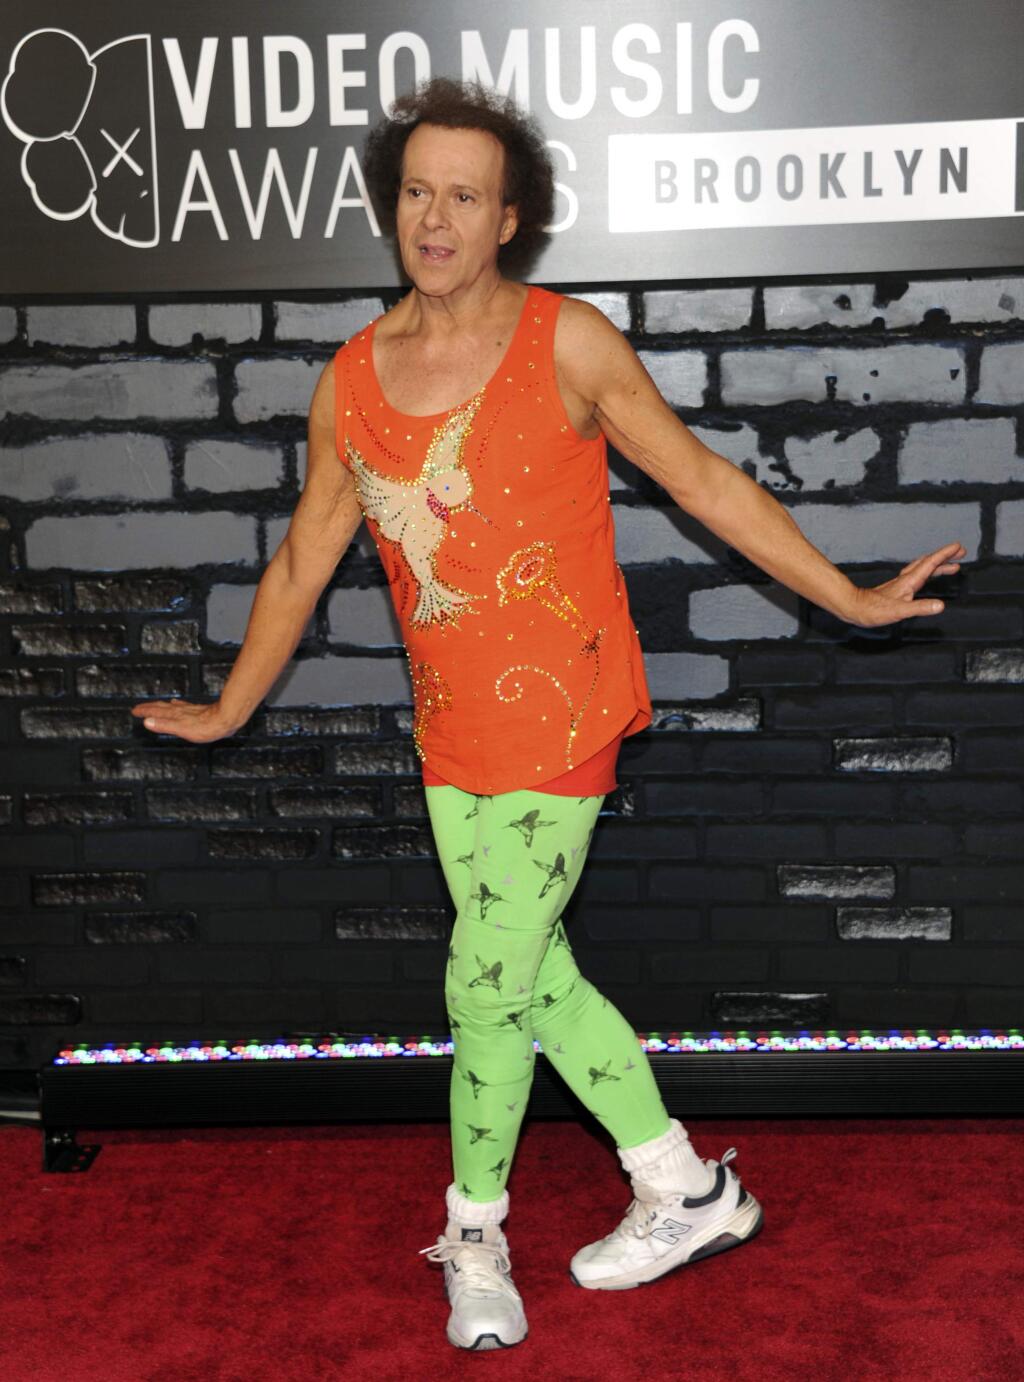 FILE - In this Aug. 25, 2013 file photo, Richard Simmons arrives at the MTV Video Music Awards in the Brooklyn borough of New York. Despite what seems to be a national obsession with the fitness guru's wellbeing, his publicist, manager, brother and two officers from the LAPD have all said the 68-year-old is at home in the Hollywood Hills and doing fine. (Photo by Evan Agostini/Invision/AP, File)